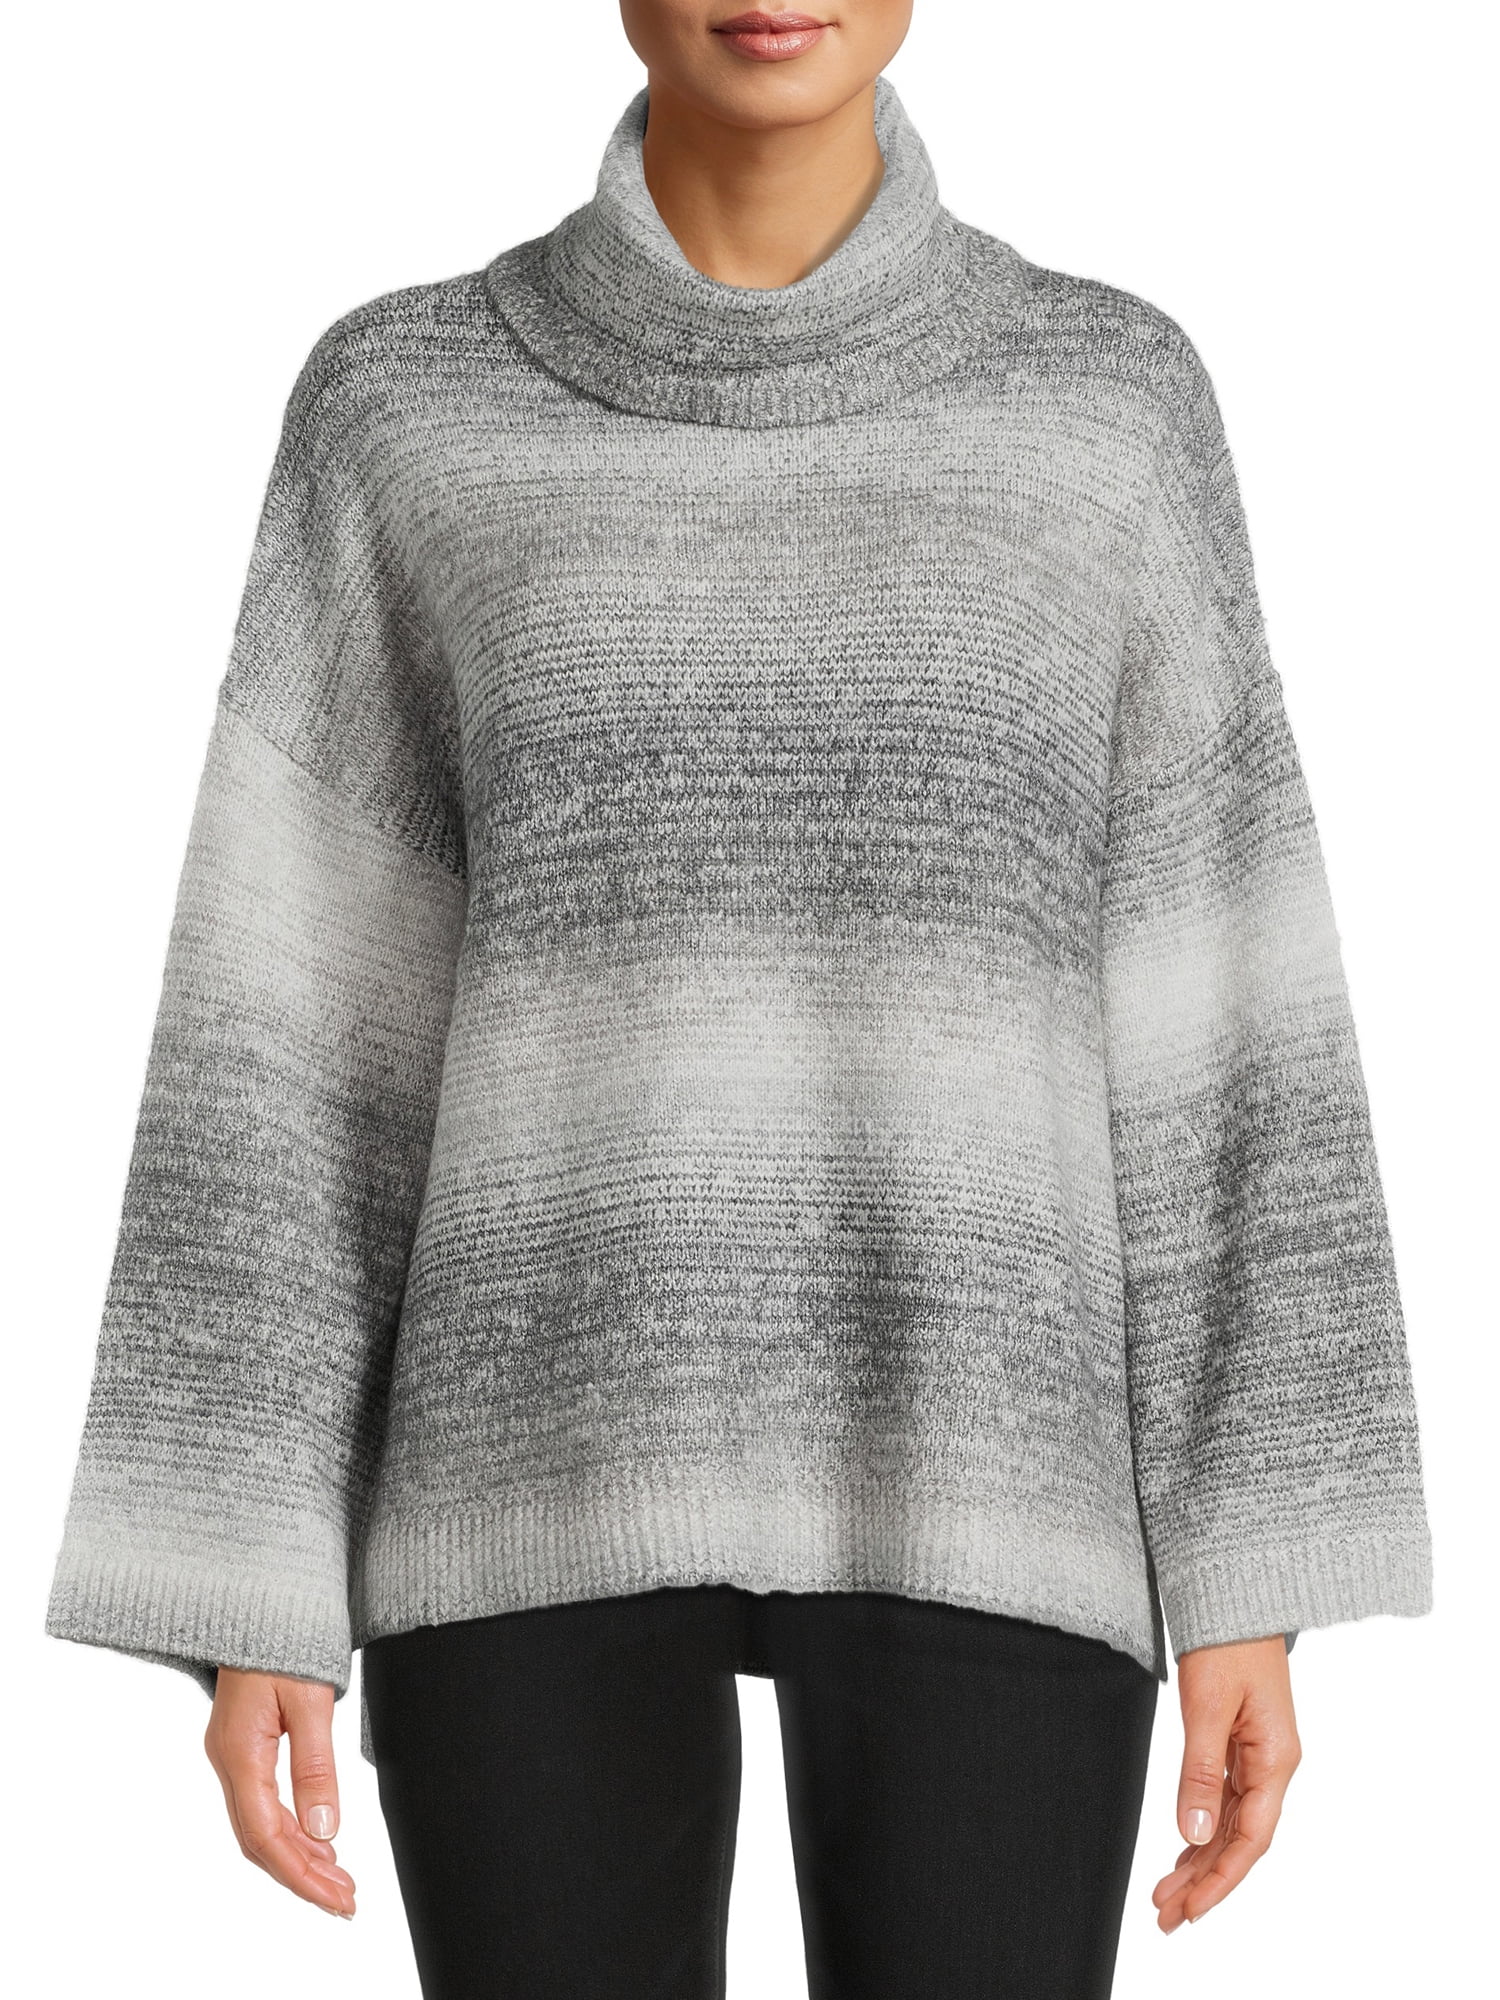 Time and Tru Women's Ombre Cowl Neck Pullover Sweater, Midweight, Sizes ...